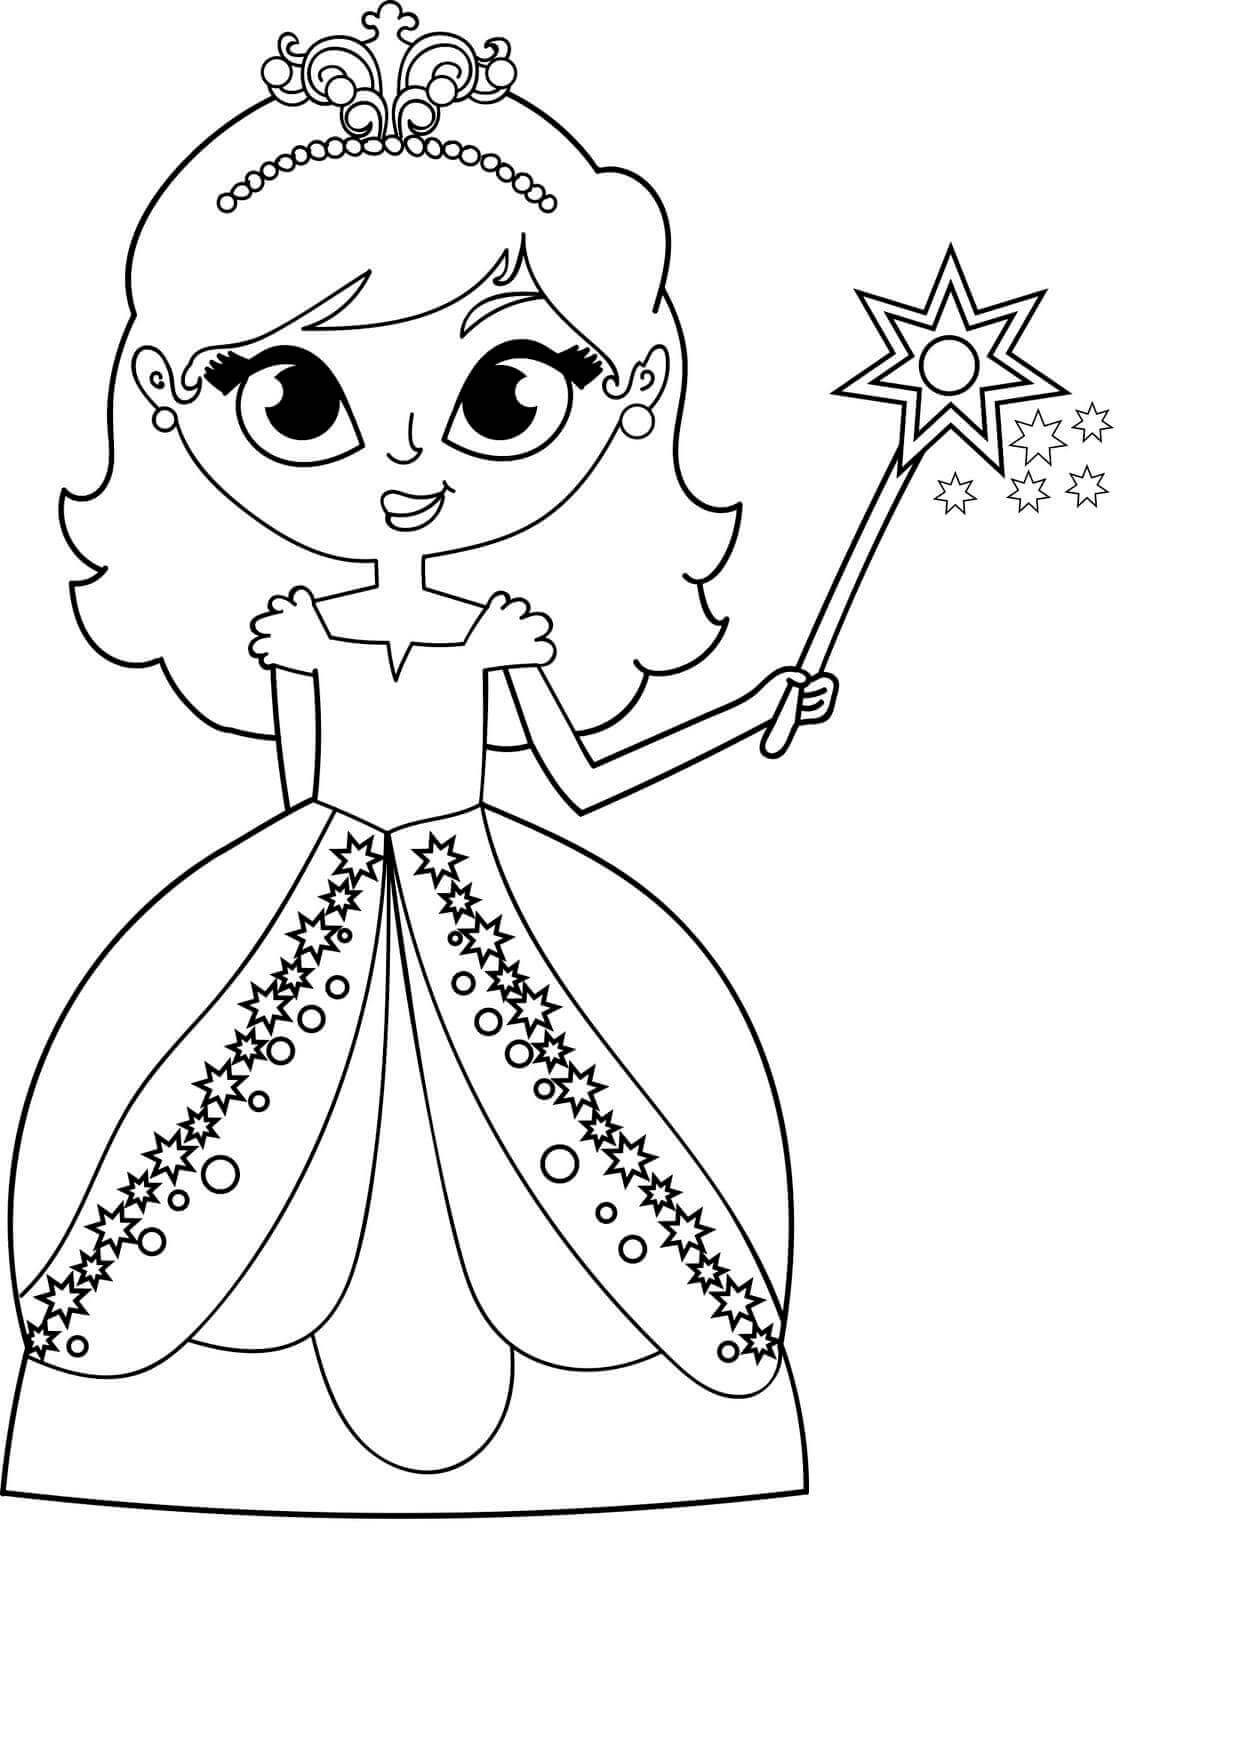 Online Printable Coloring Pages For Girls
 Free Printable Coloring Pages For Girls